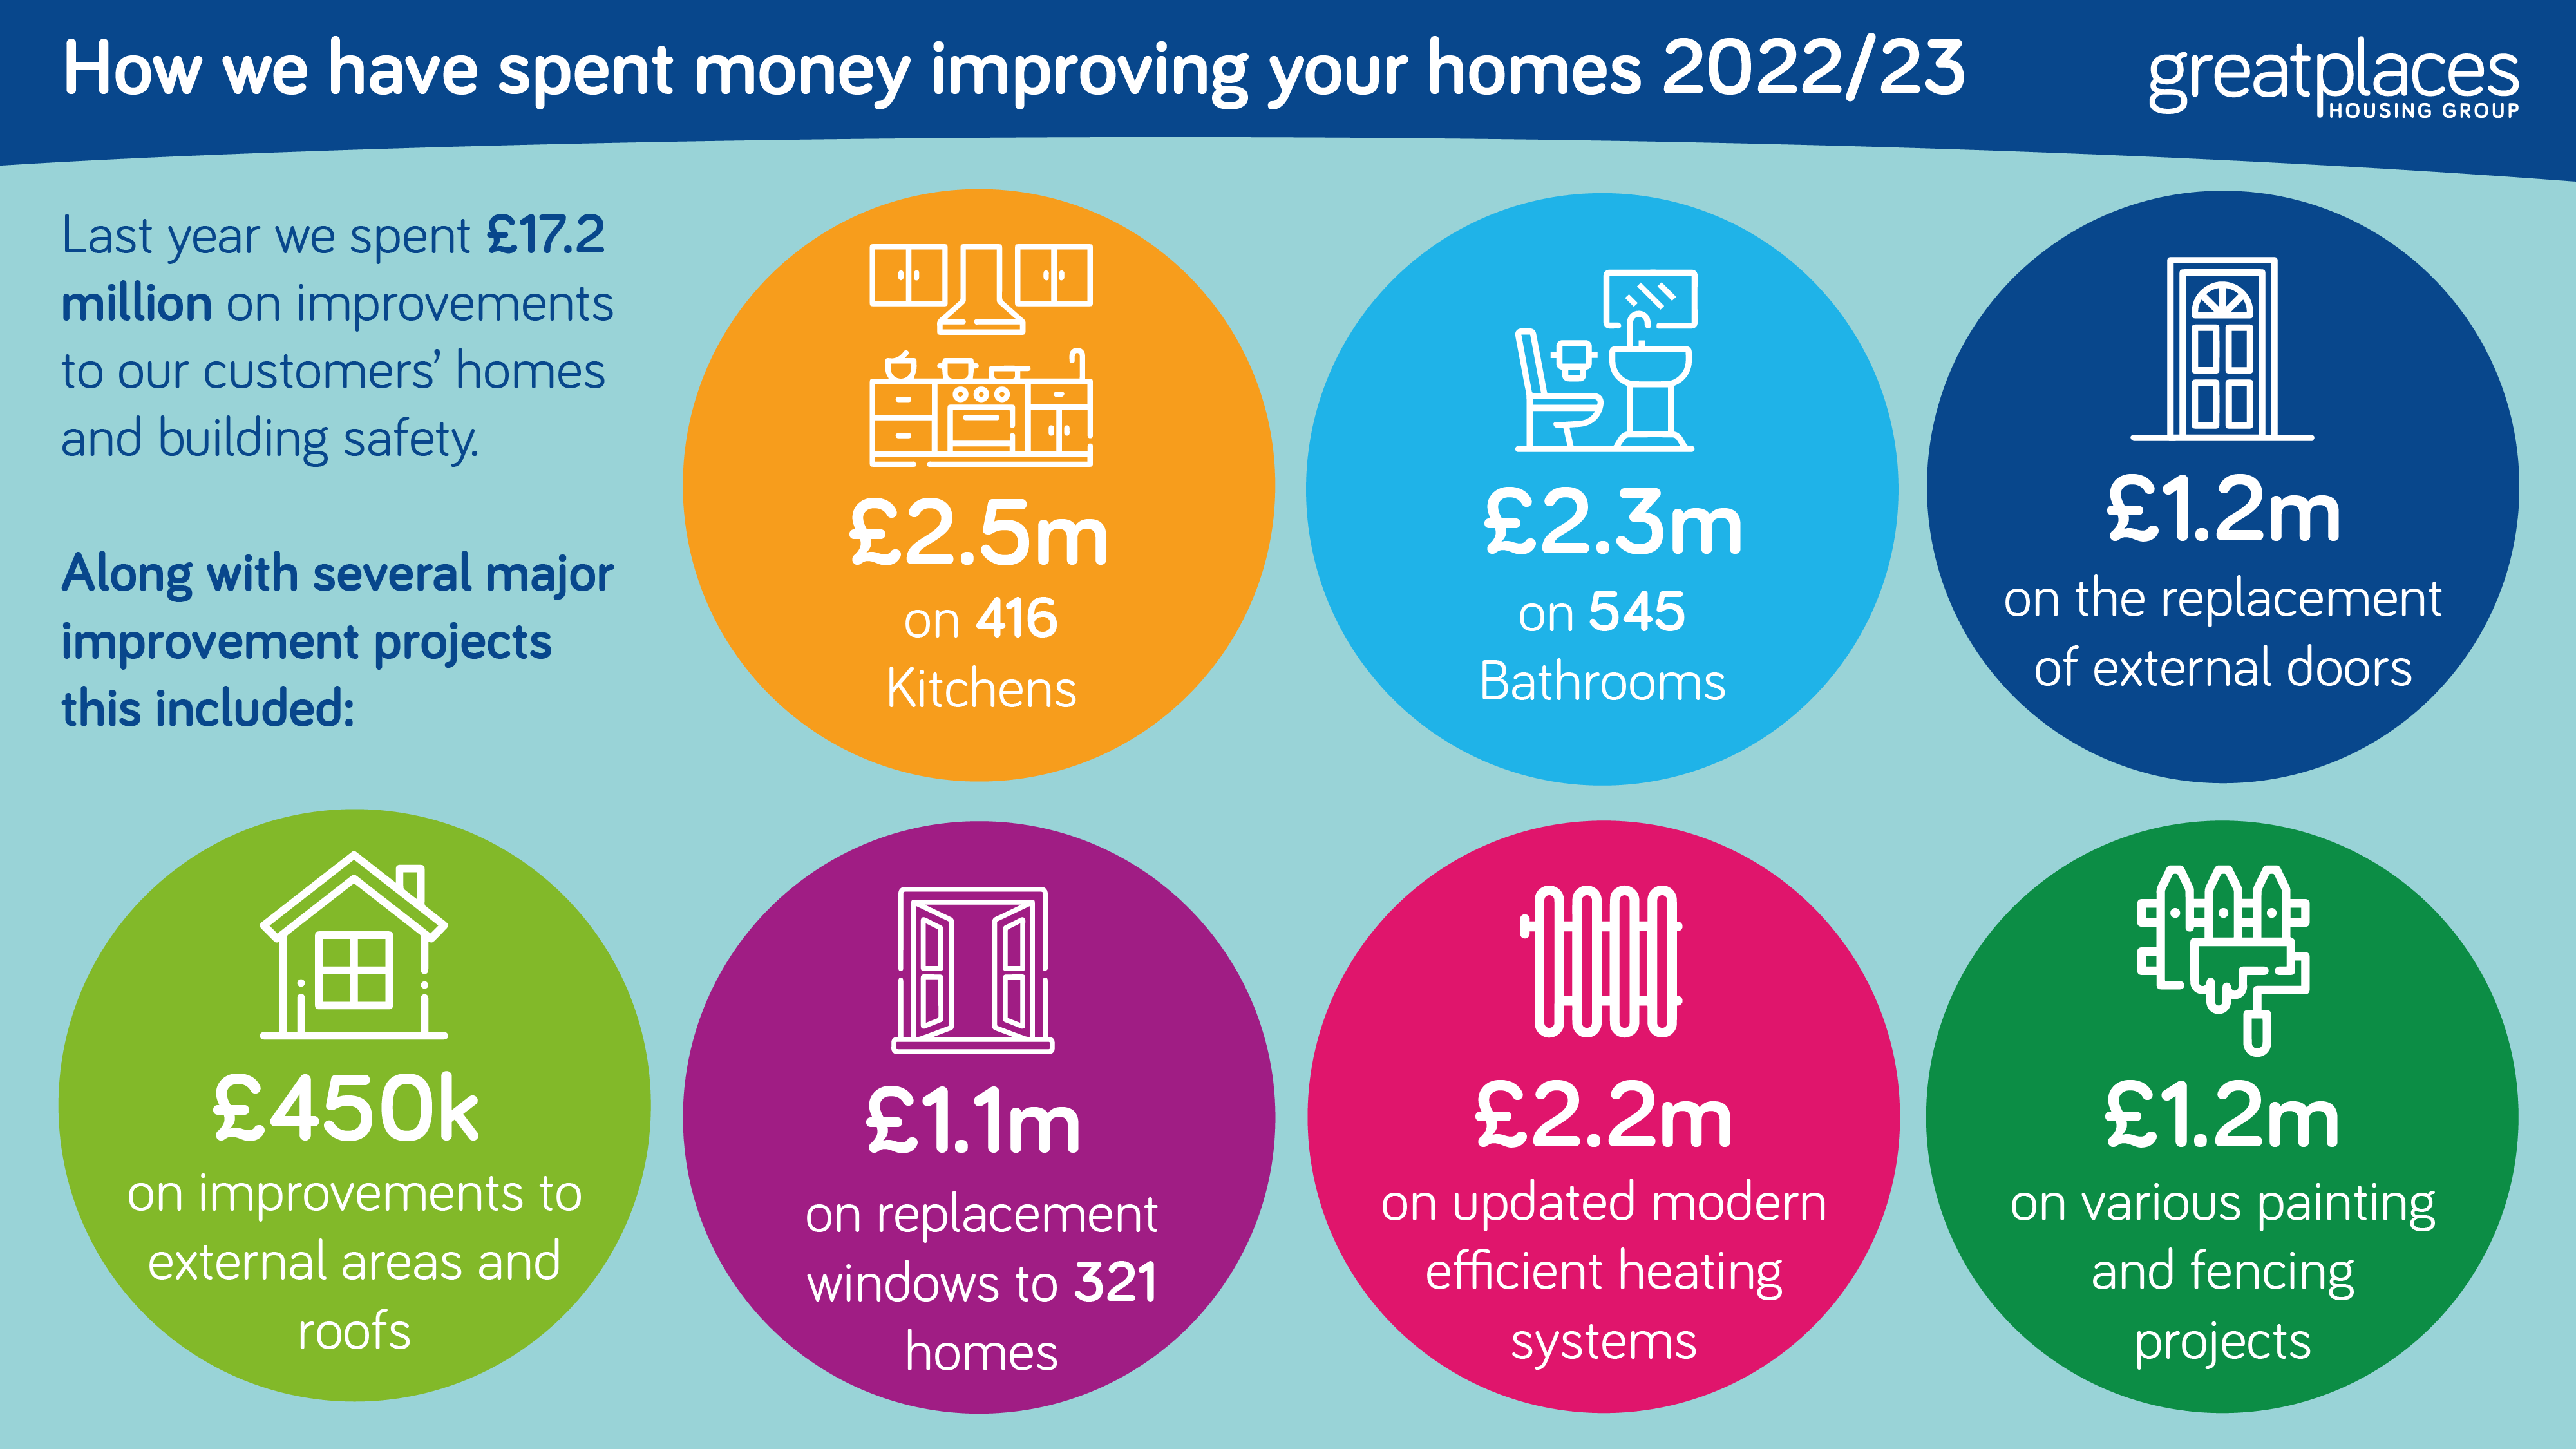 How we spent money improving your homes